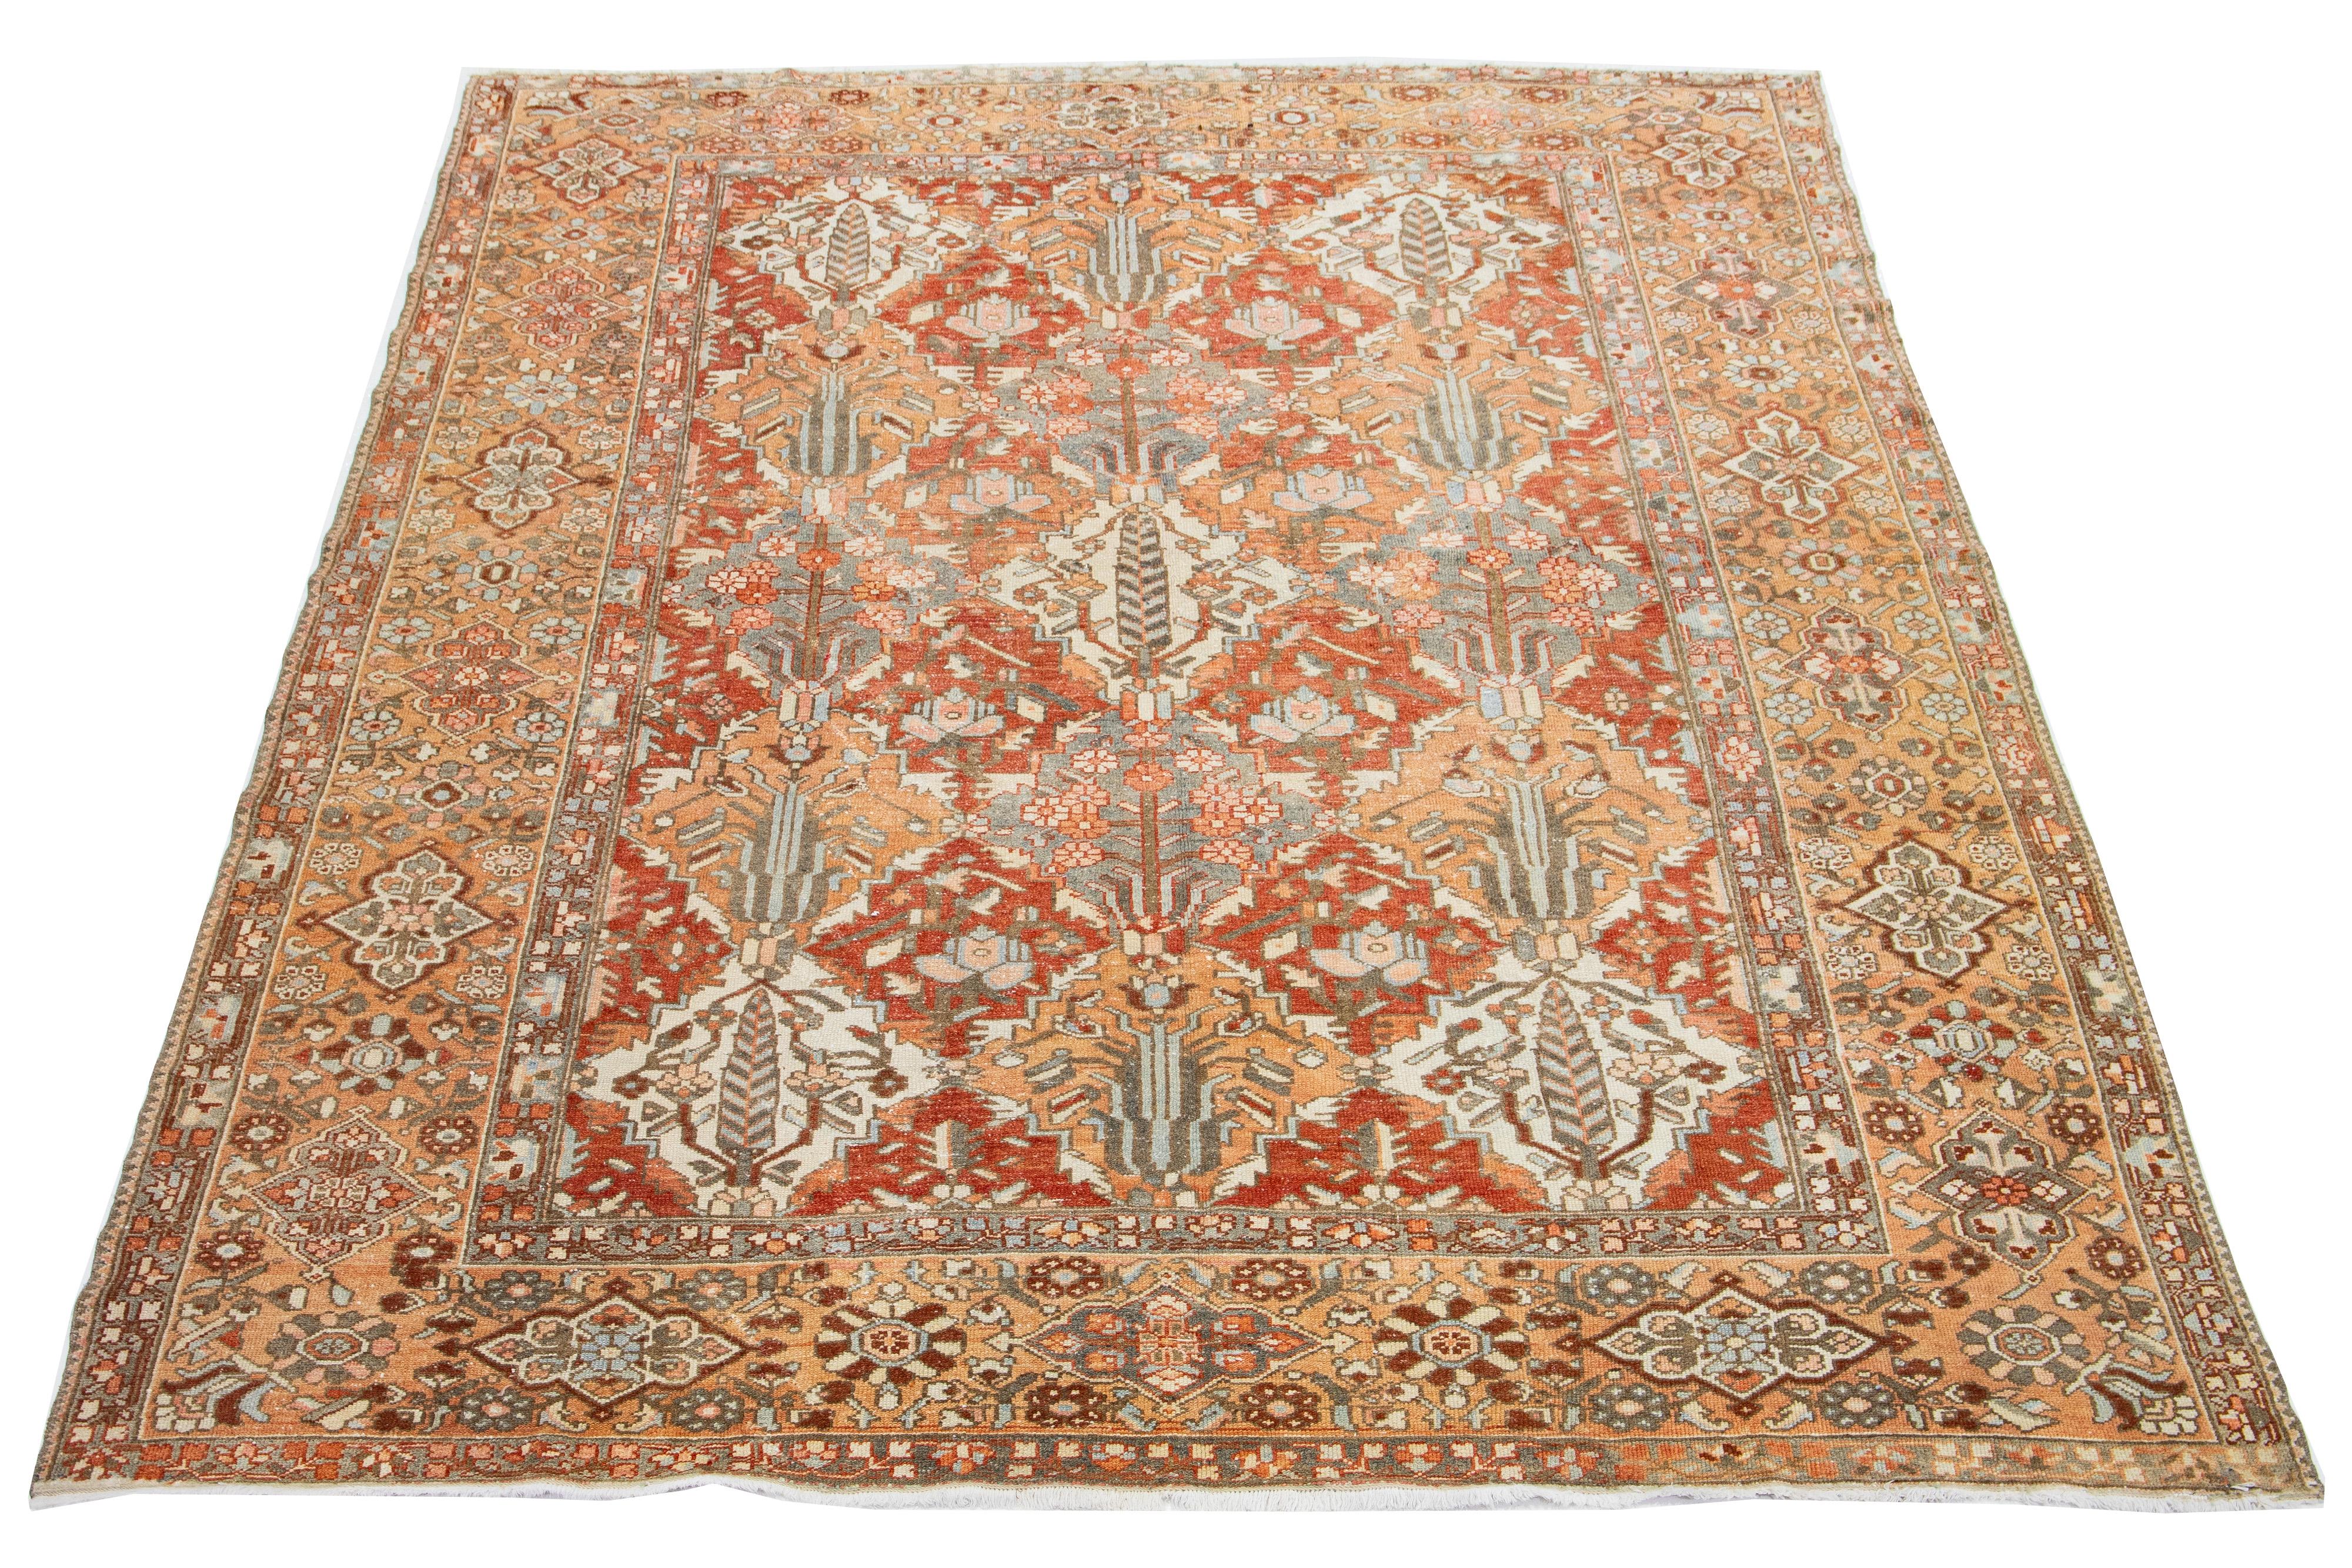 This beautiful antique Bakhtiari hand-knotted wool rug features a field of red-rust color. It showcases a classic Persian design with blue, beige, and orange floral colors.

This rug measures 9' x 12'.
 